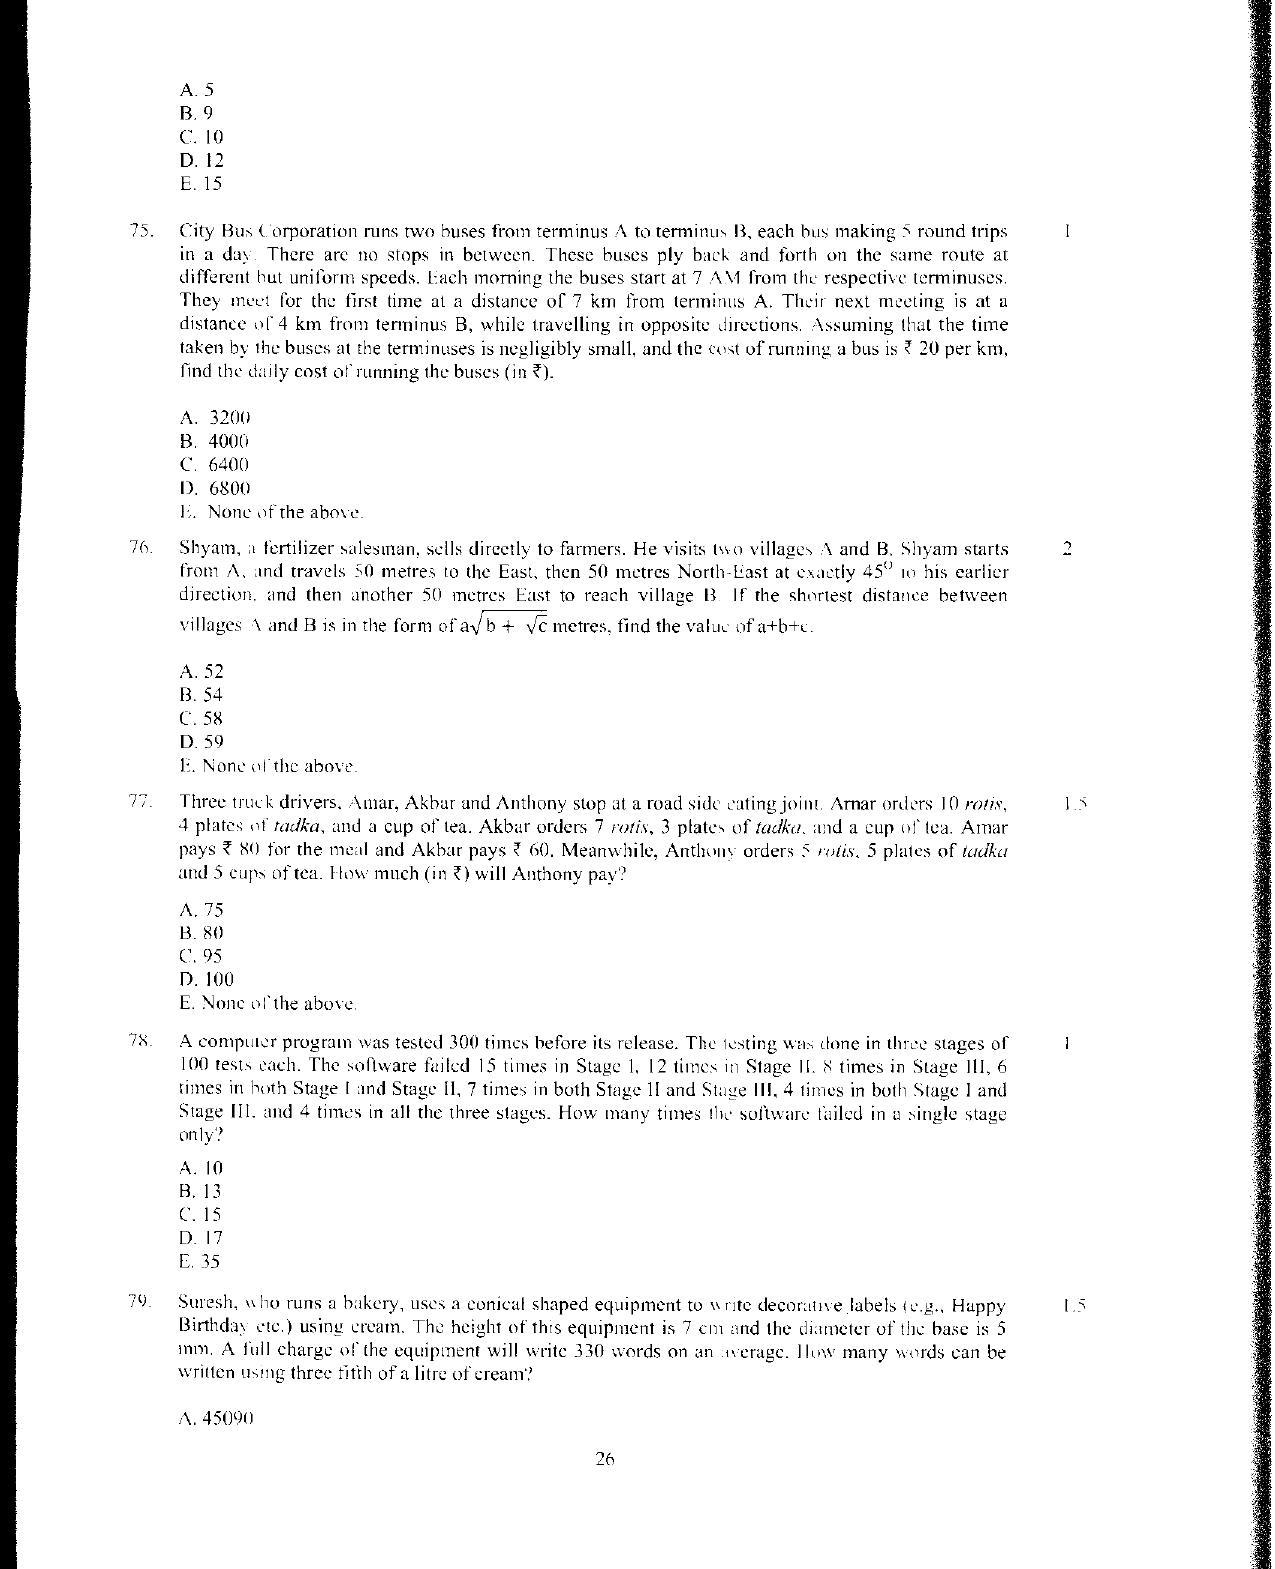 XAT 2012 Question Papers - Page 27